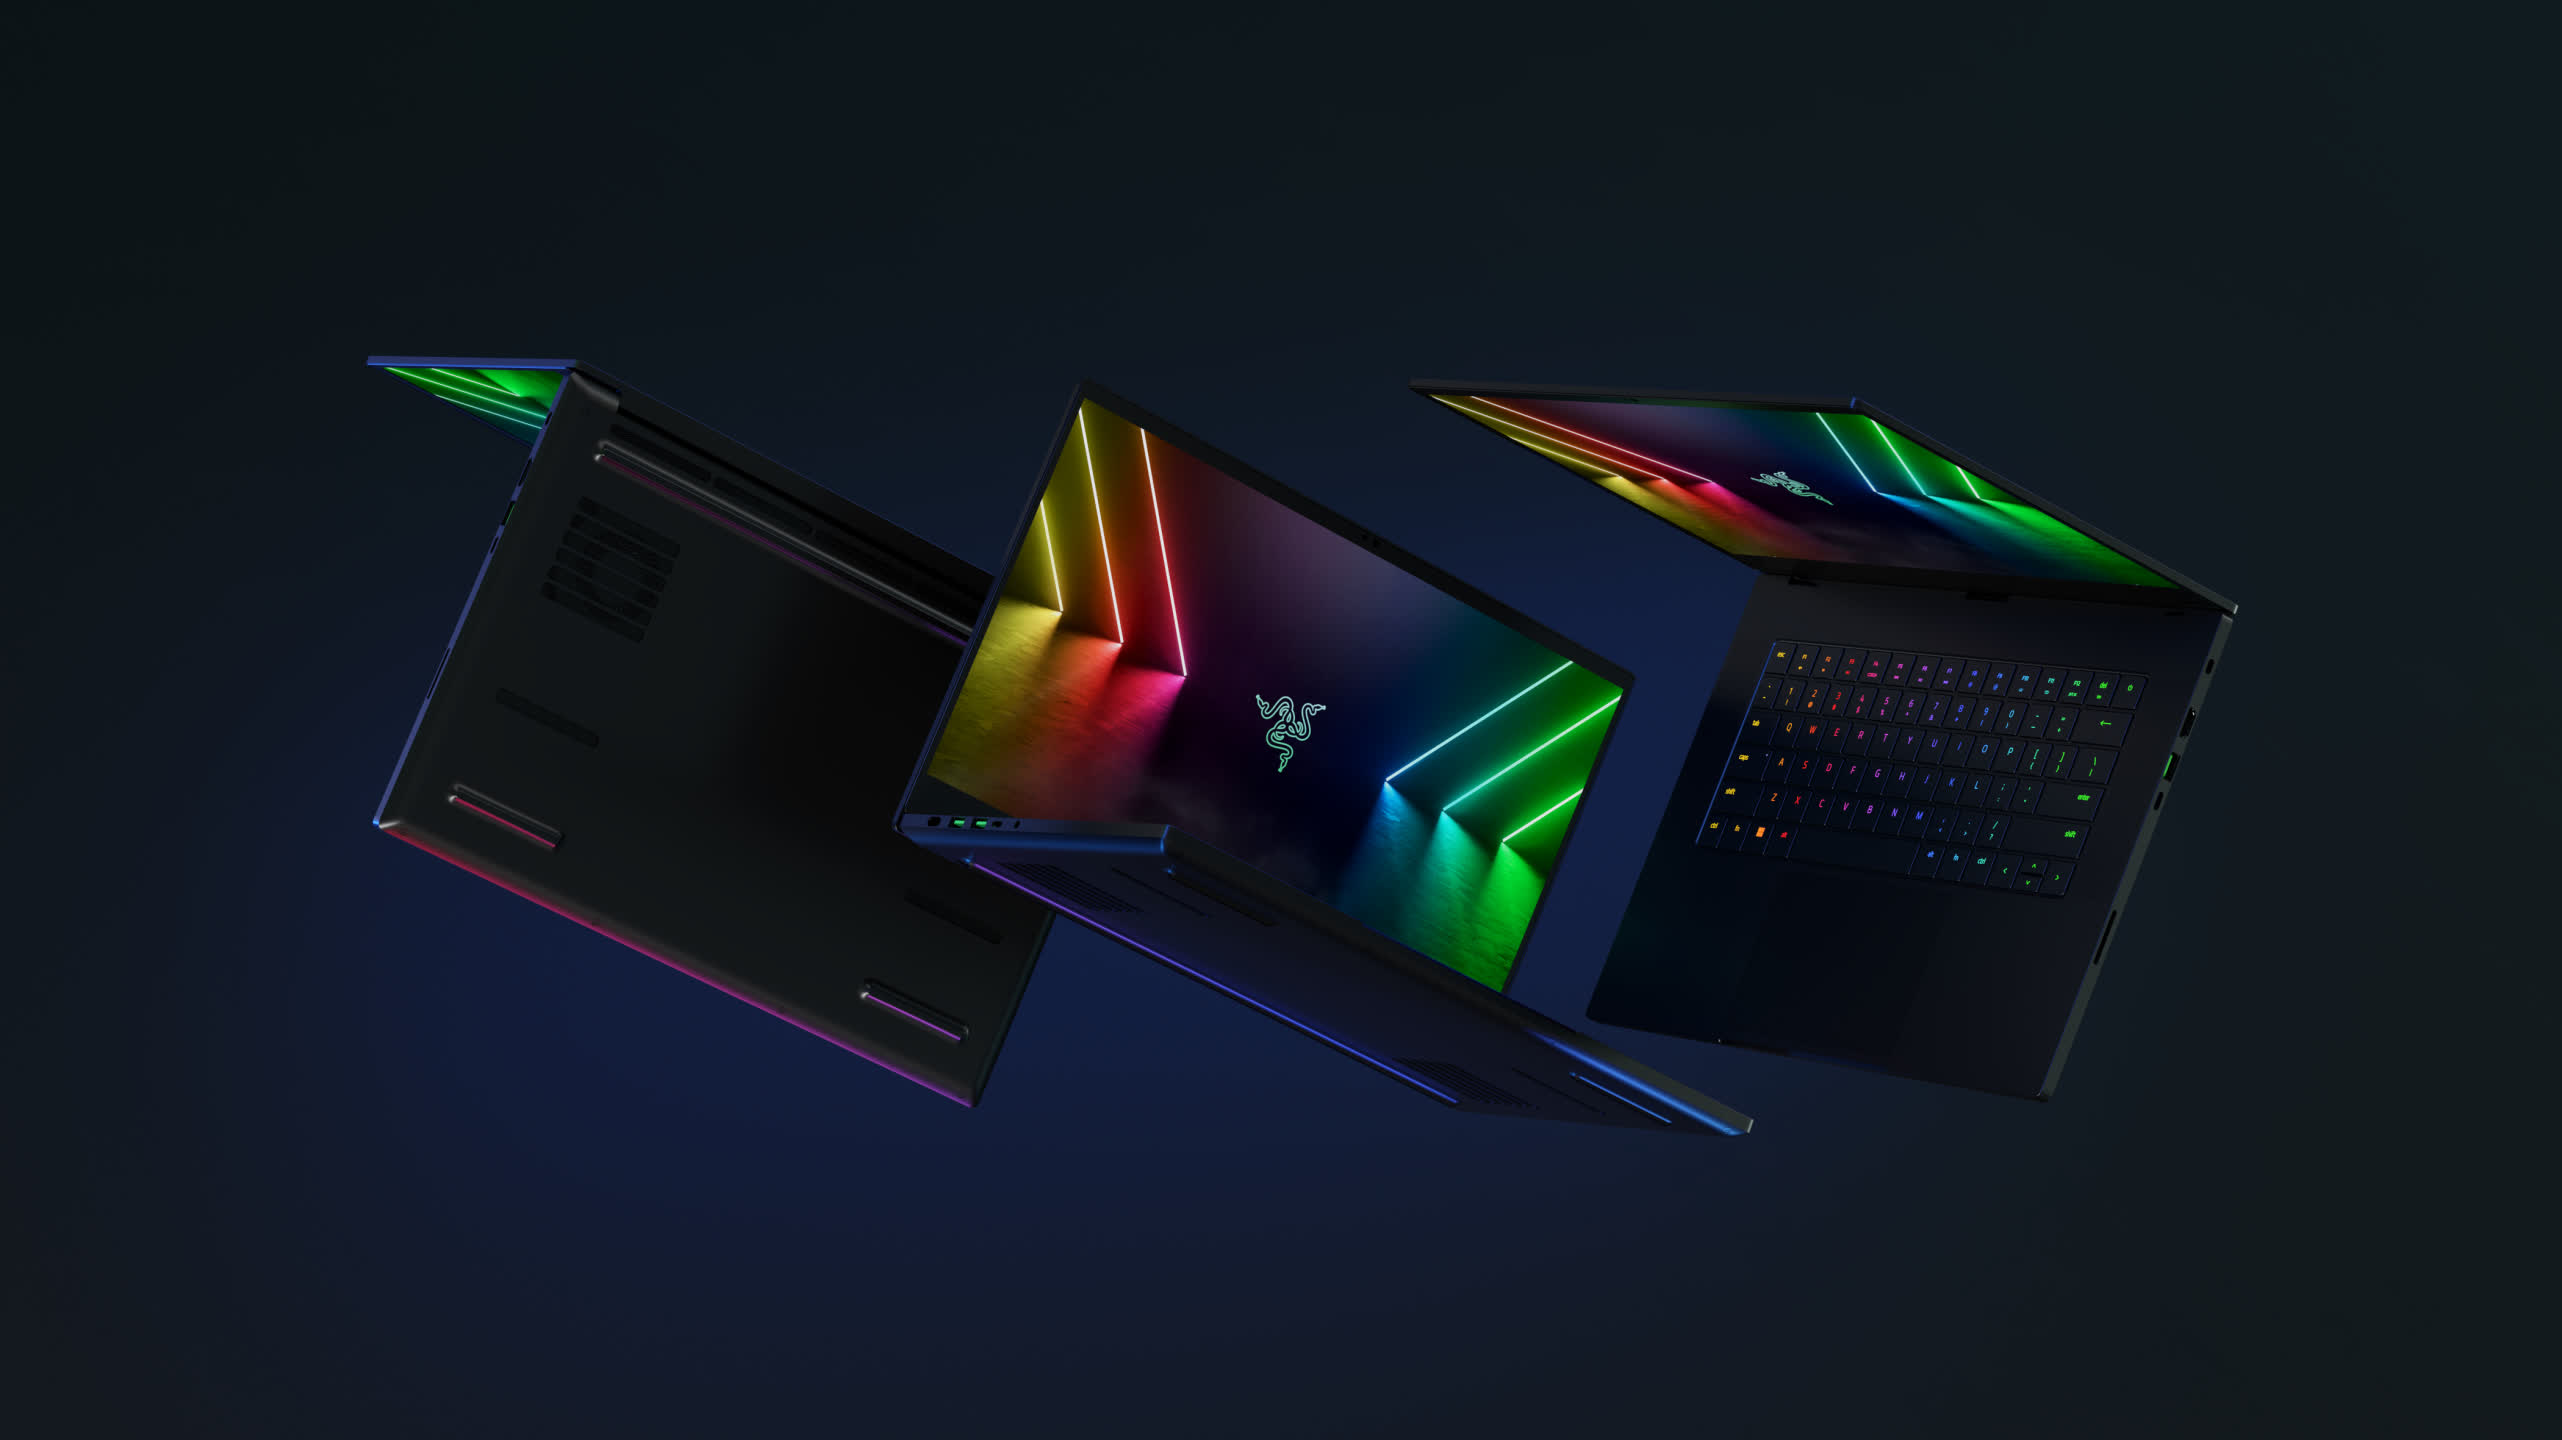 Razer updates Blade laptops with RTX 30 GPUs, new CPUs, and DDR5 memory